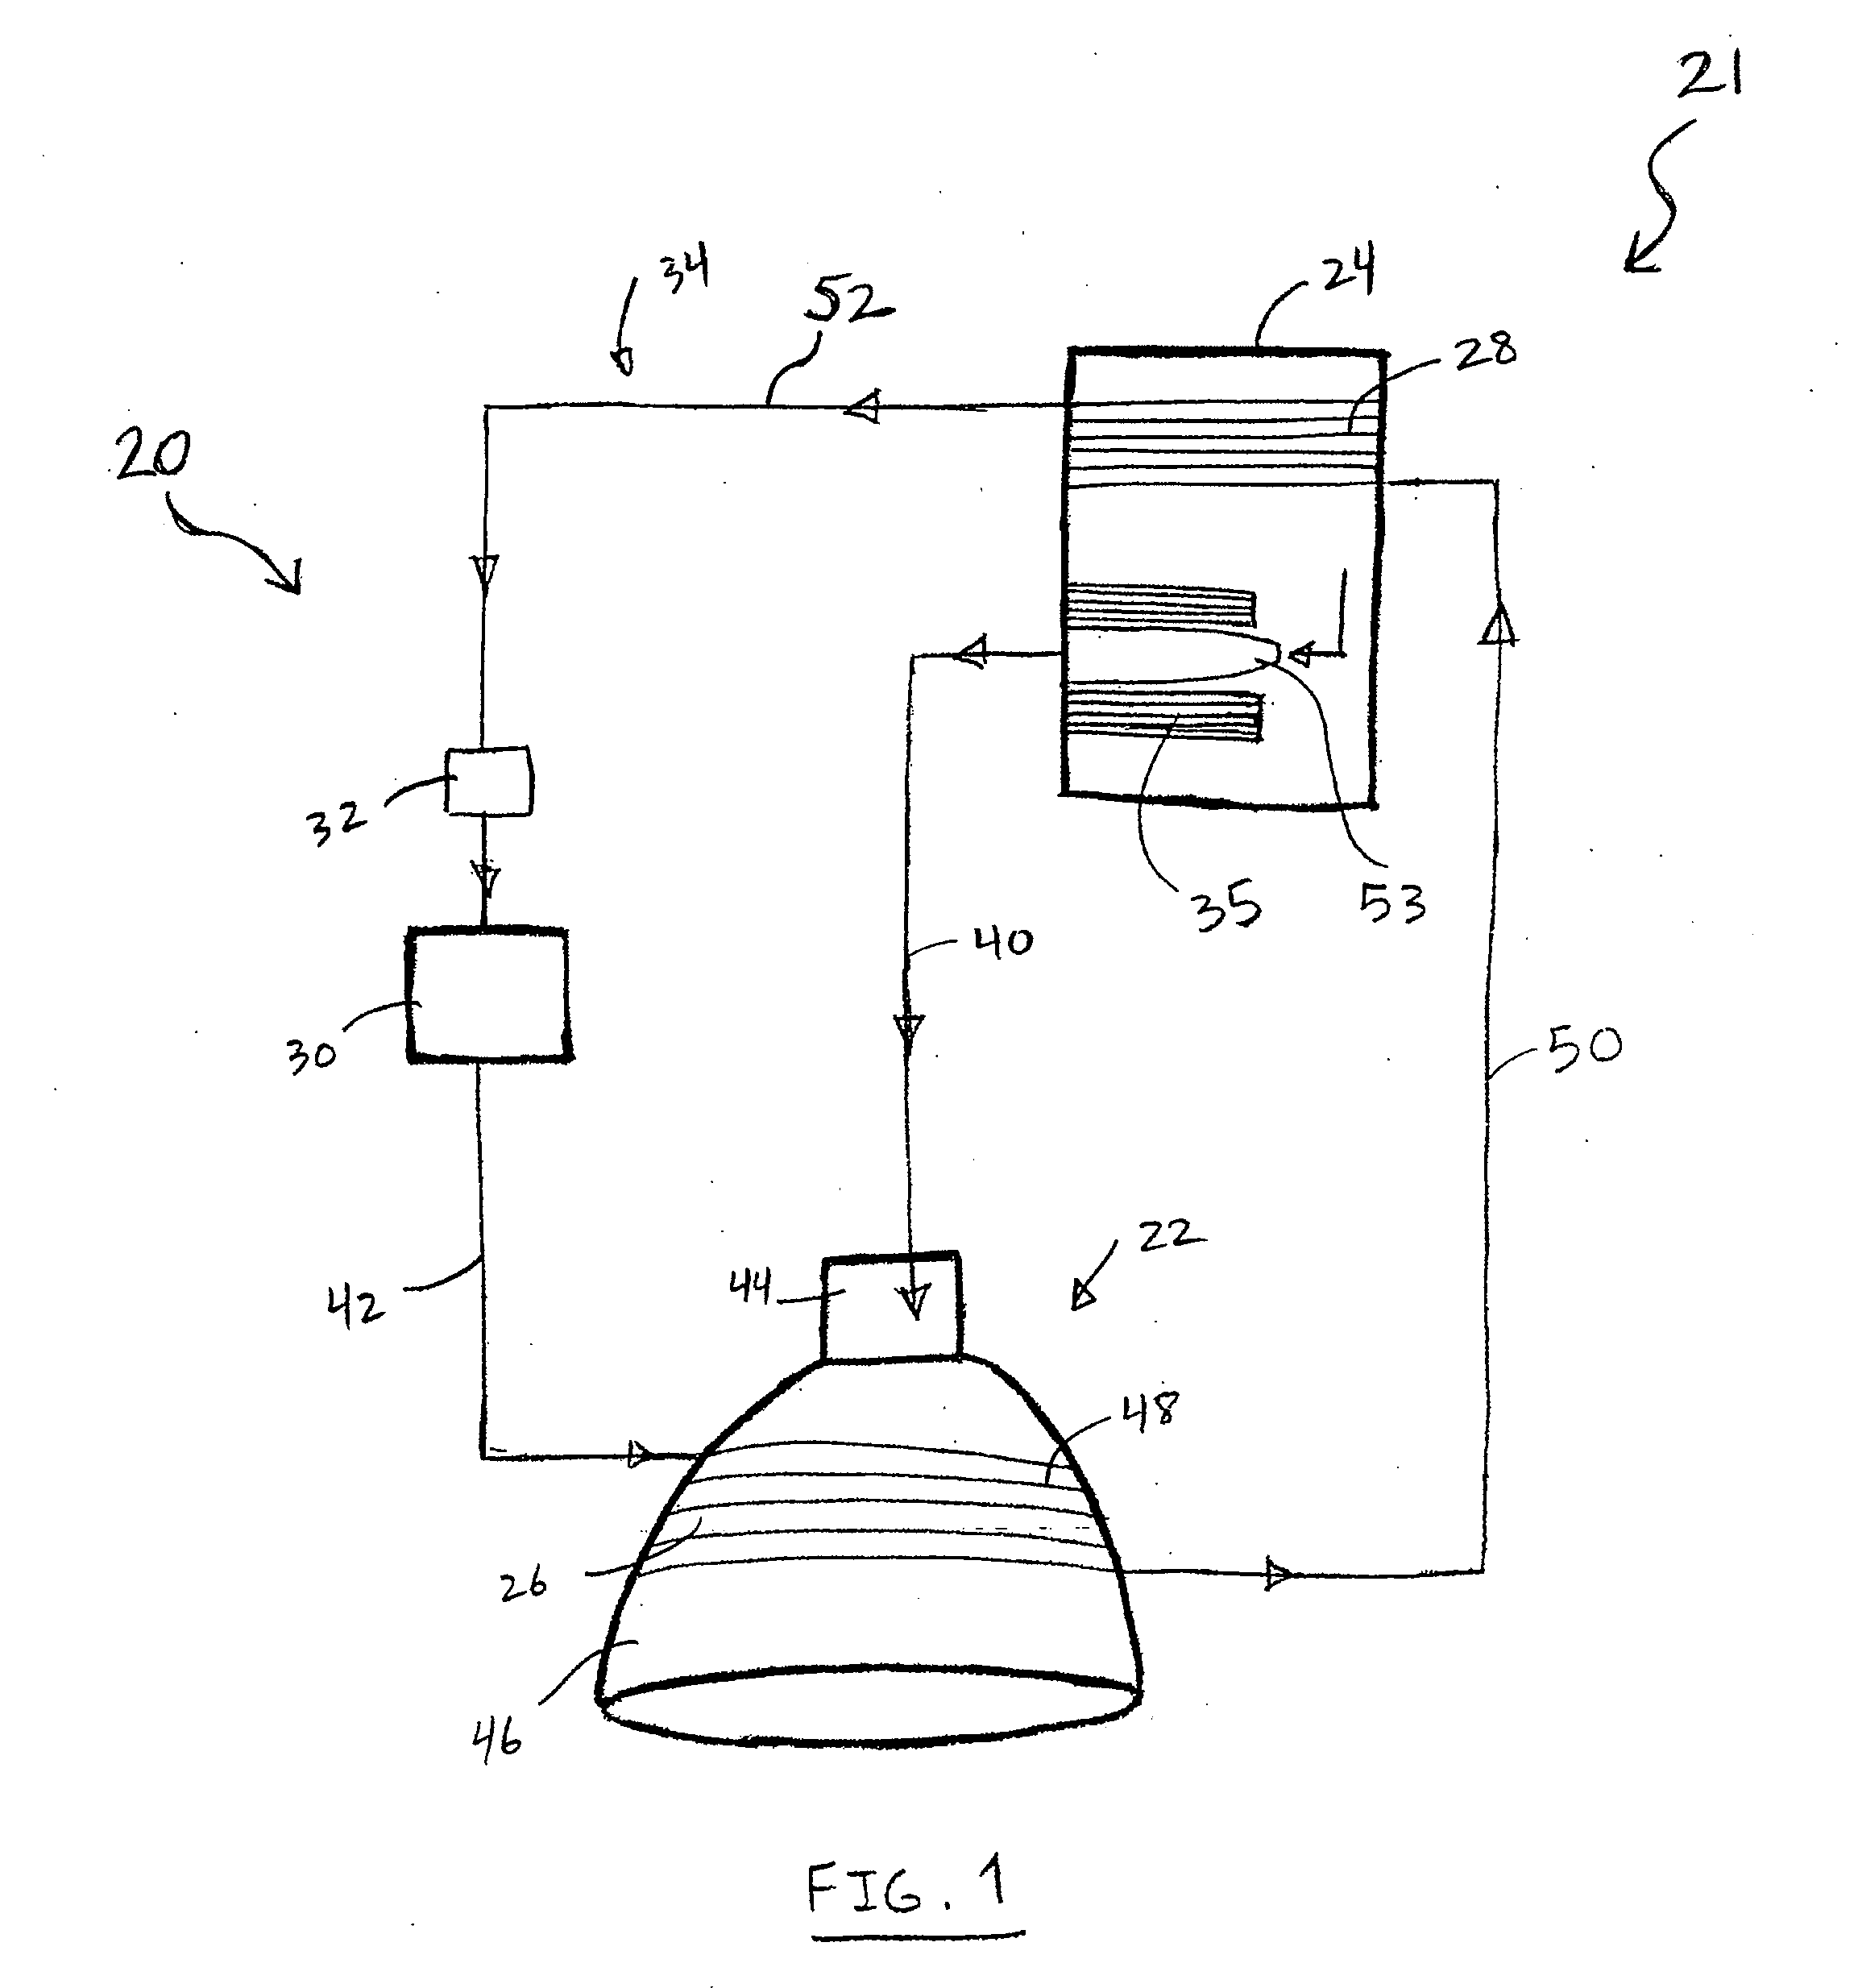 System and method for cooling rocket engines